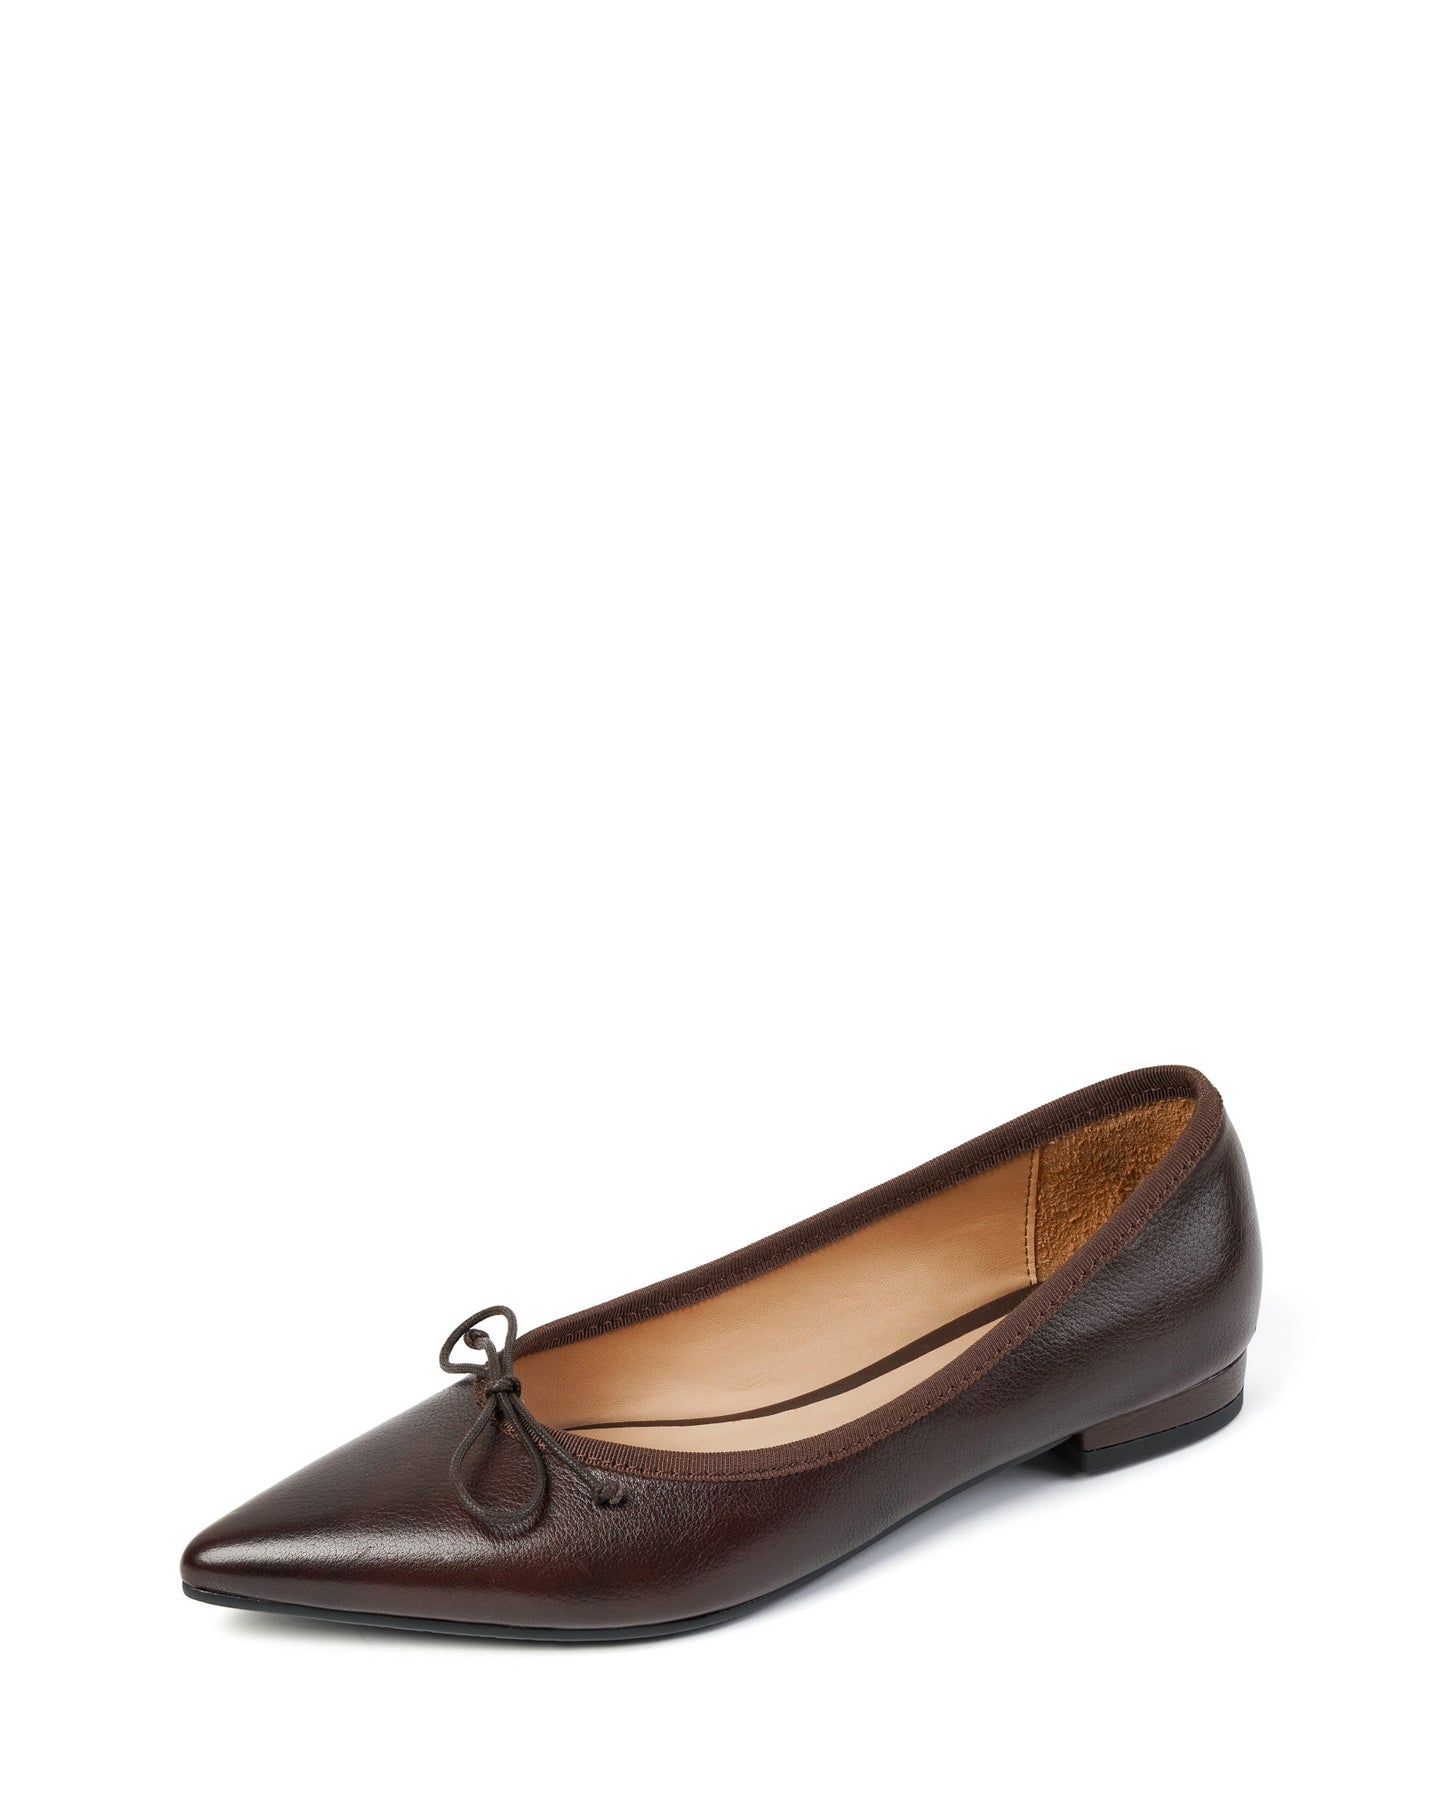 Nosa-brown-leather-flats